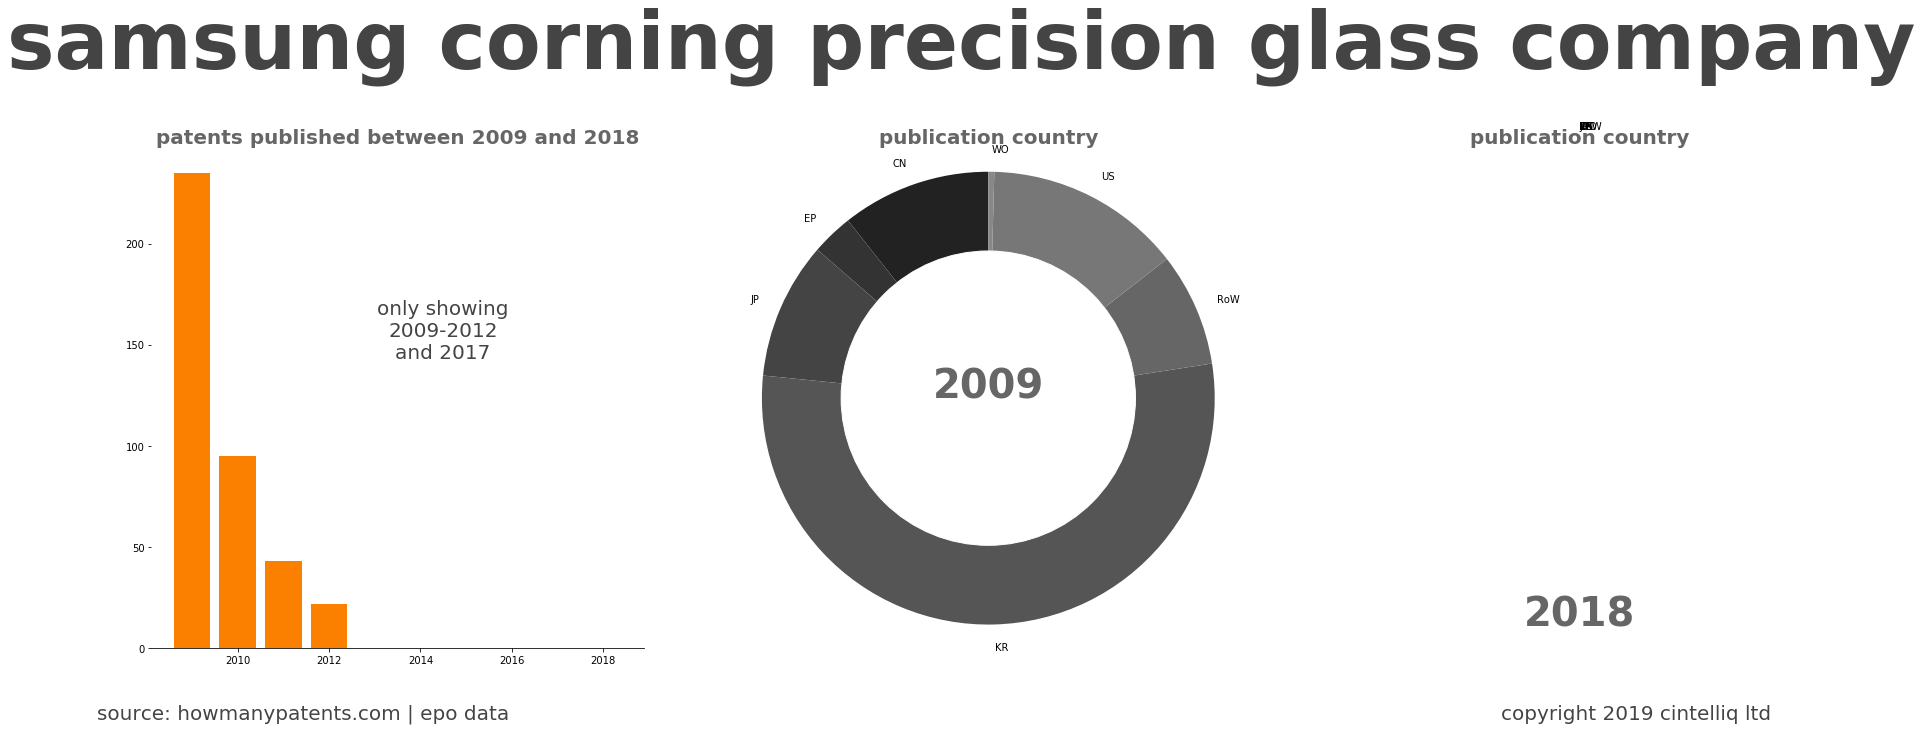 summary of patents for Samsung Corning Precision Glass Company